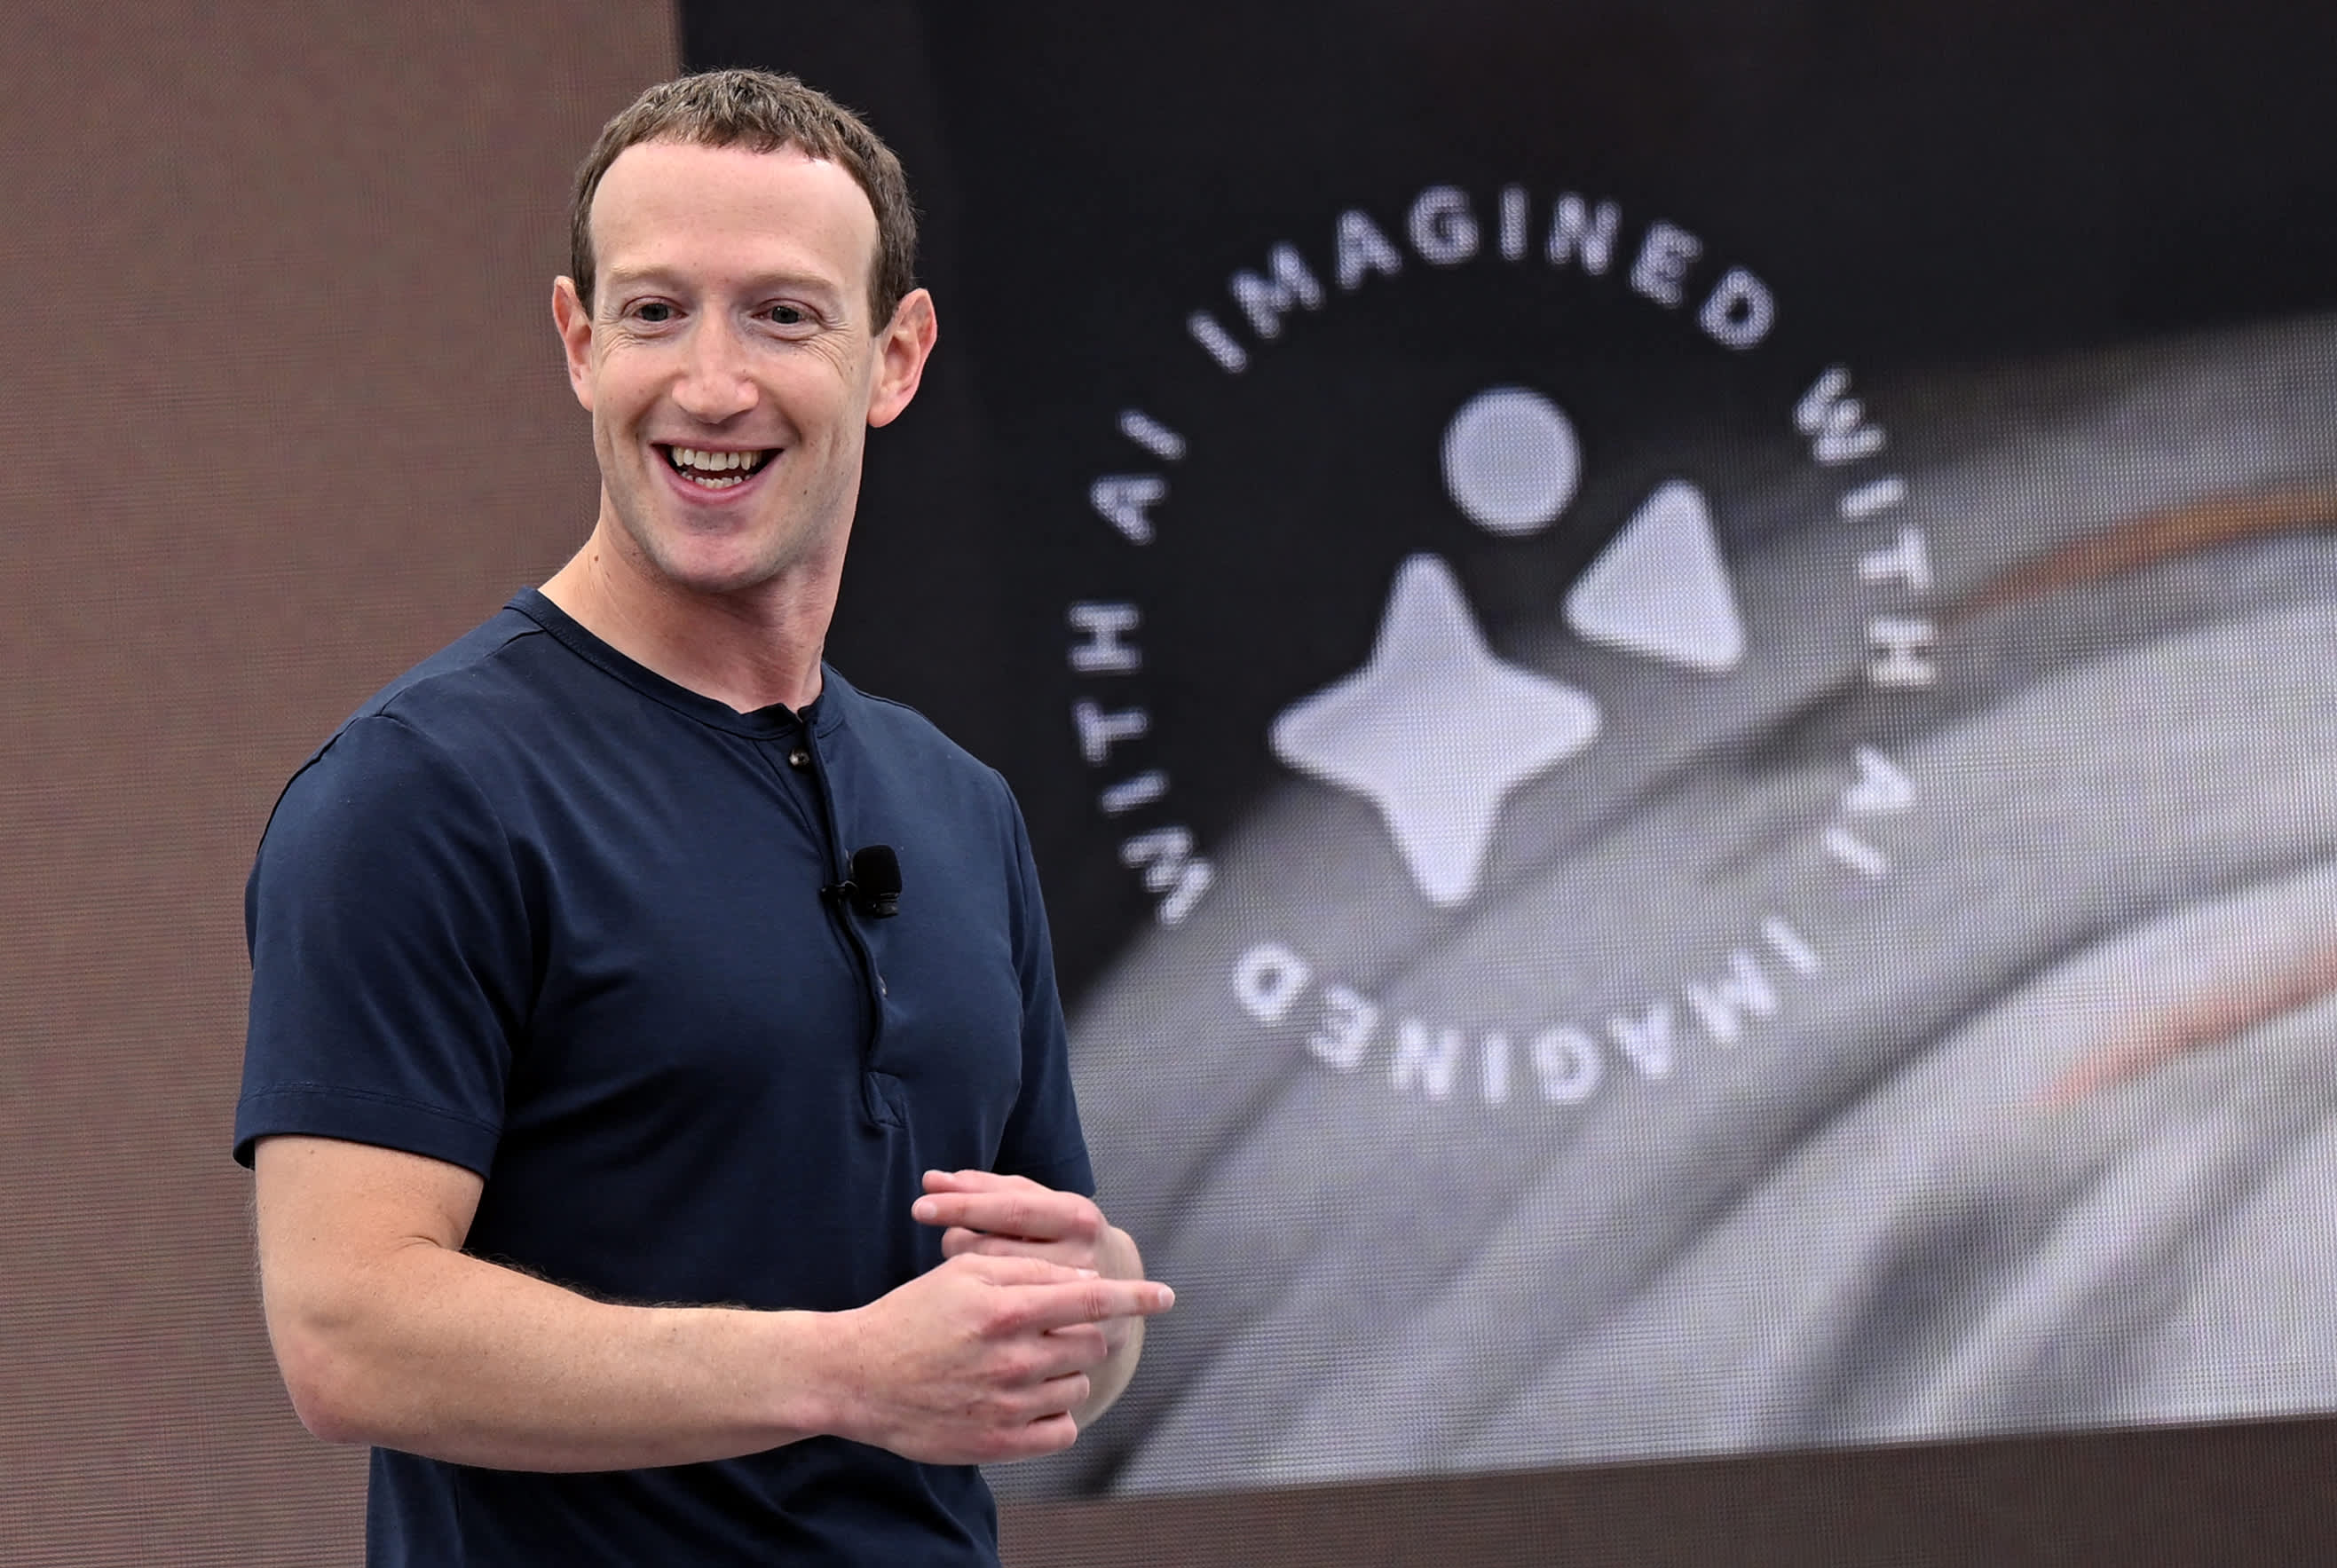 Meta CEO Zuckerberg looks to digital assistants, artificial intelligence to drive the Metaverse